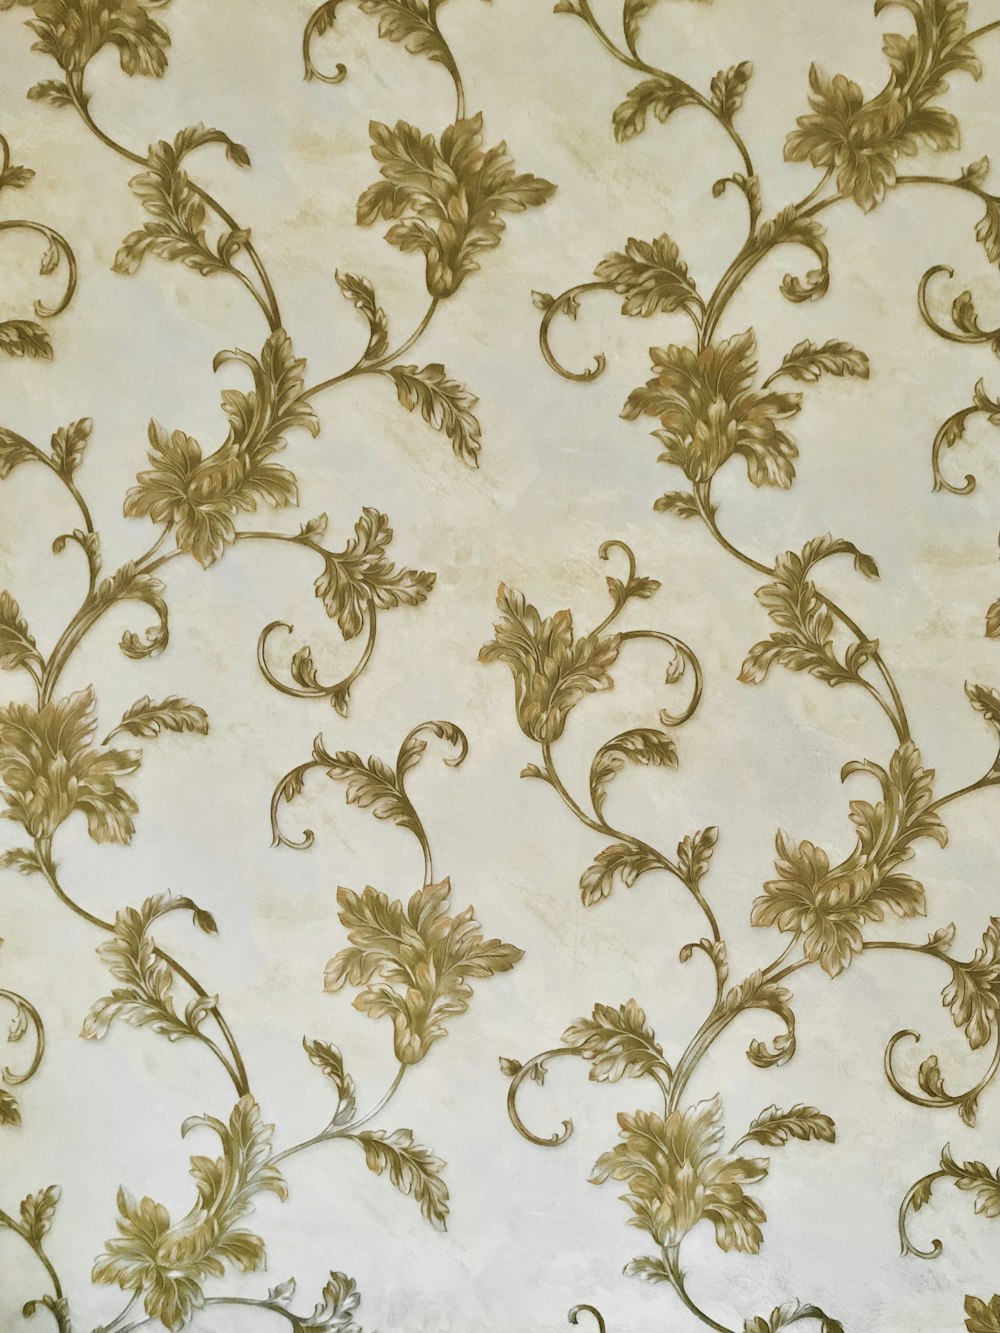 white and brown floral textile